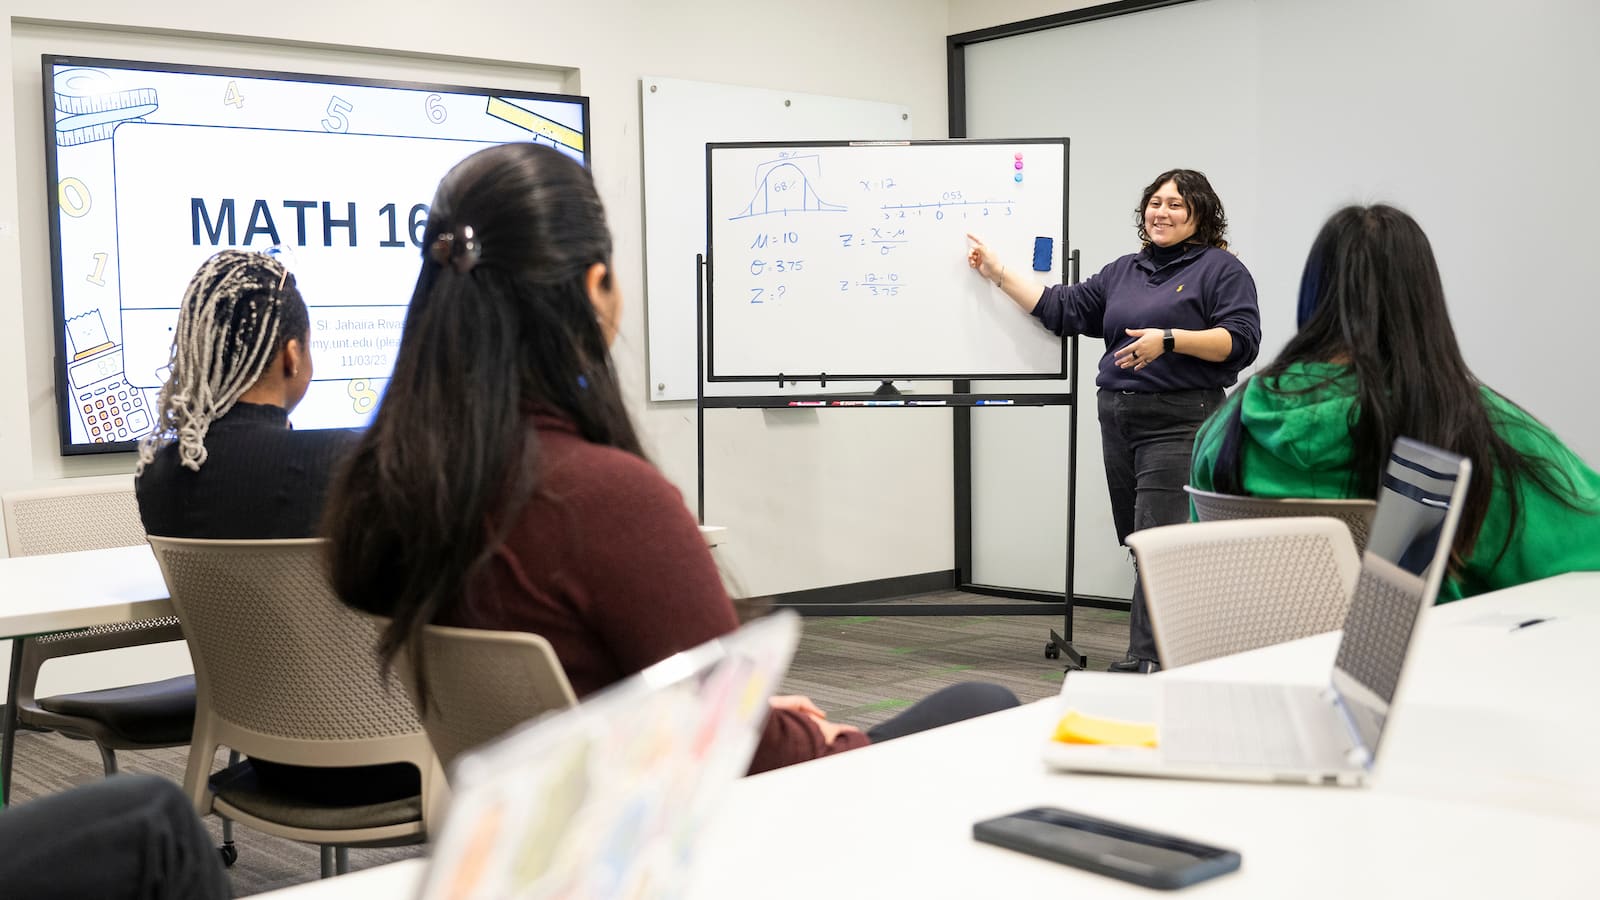 An instructor discusses math topics on a whiteboard with a classroom of young adult students